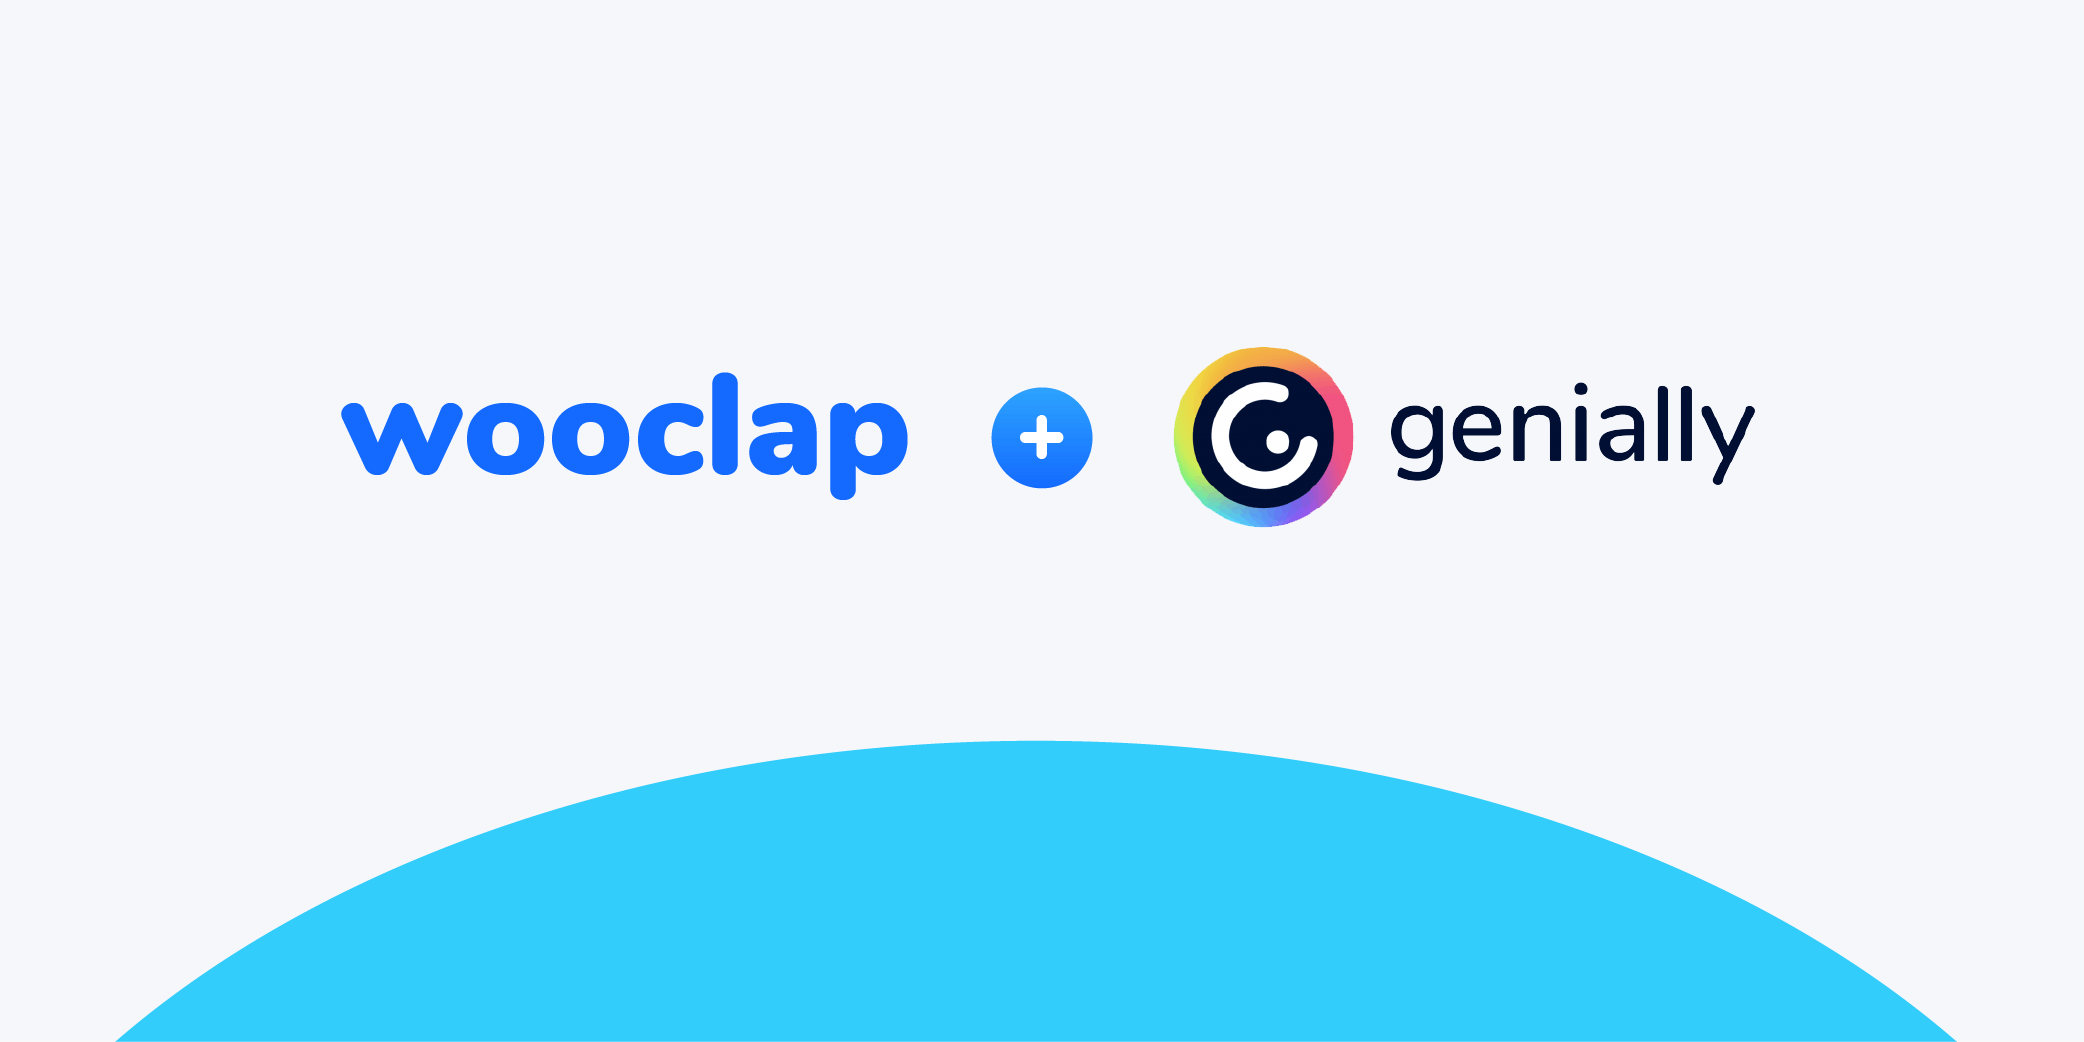 Presentations with Wooclap and Genially